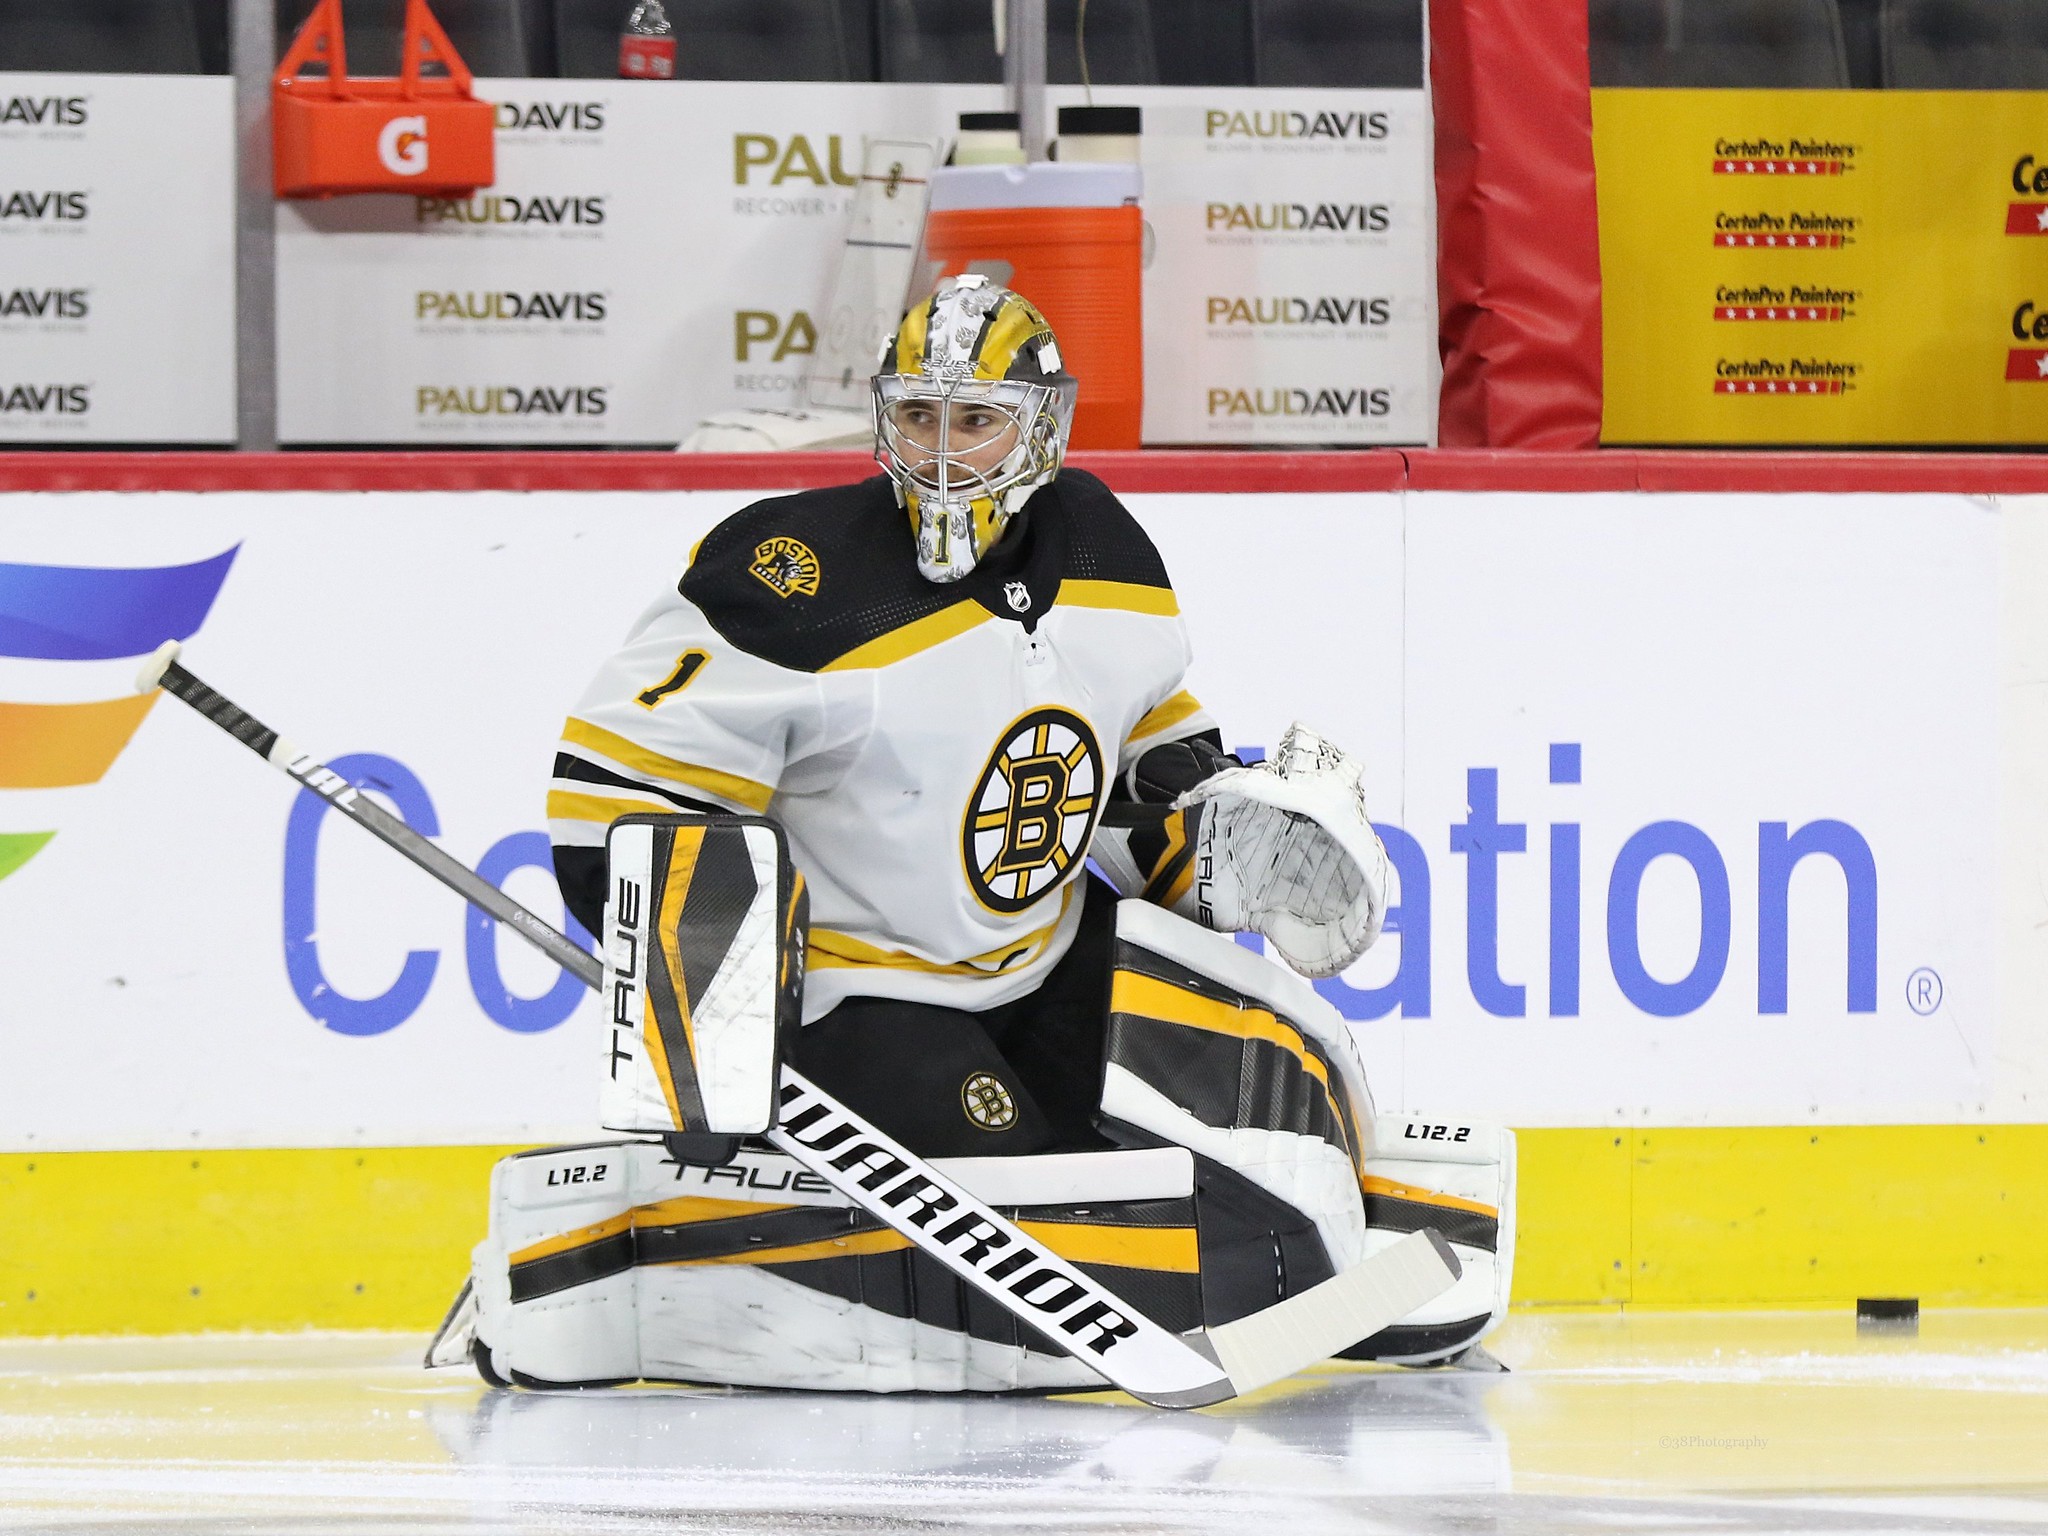 Bruins place another goalie on waivers, demote one forward